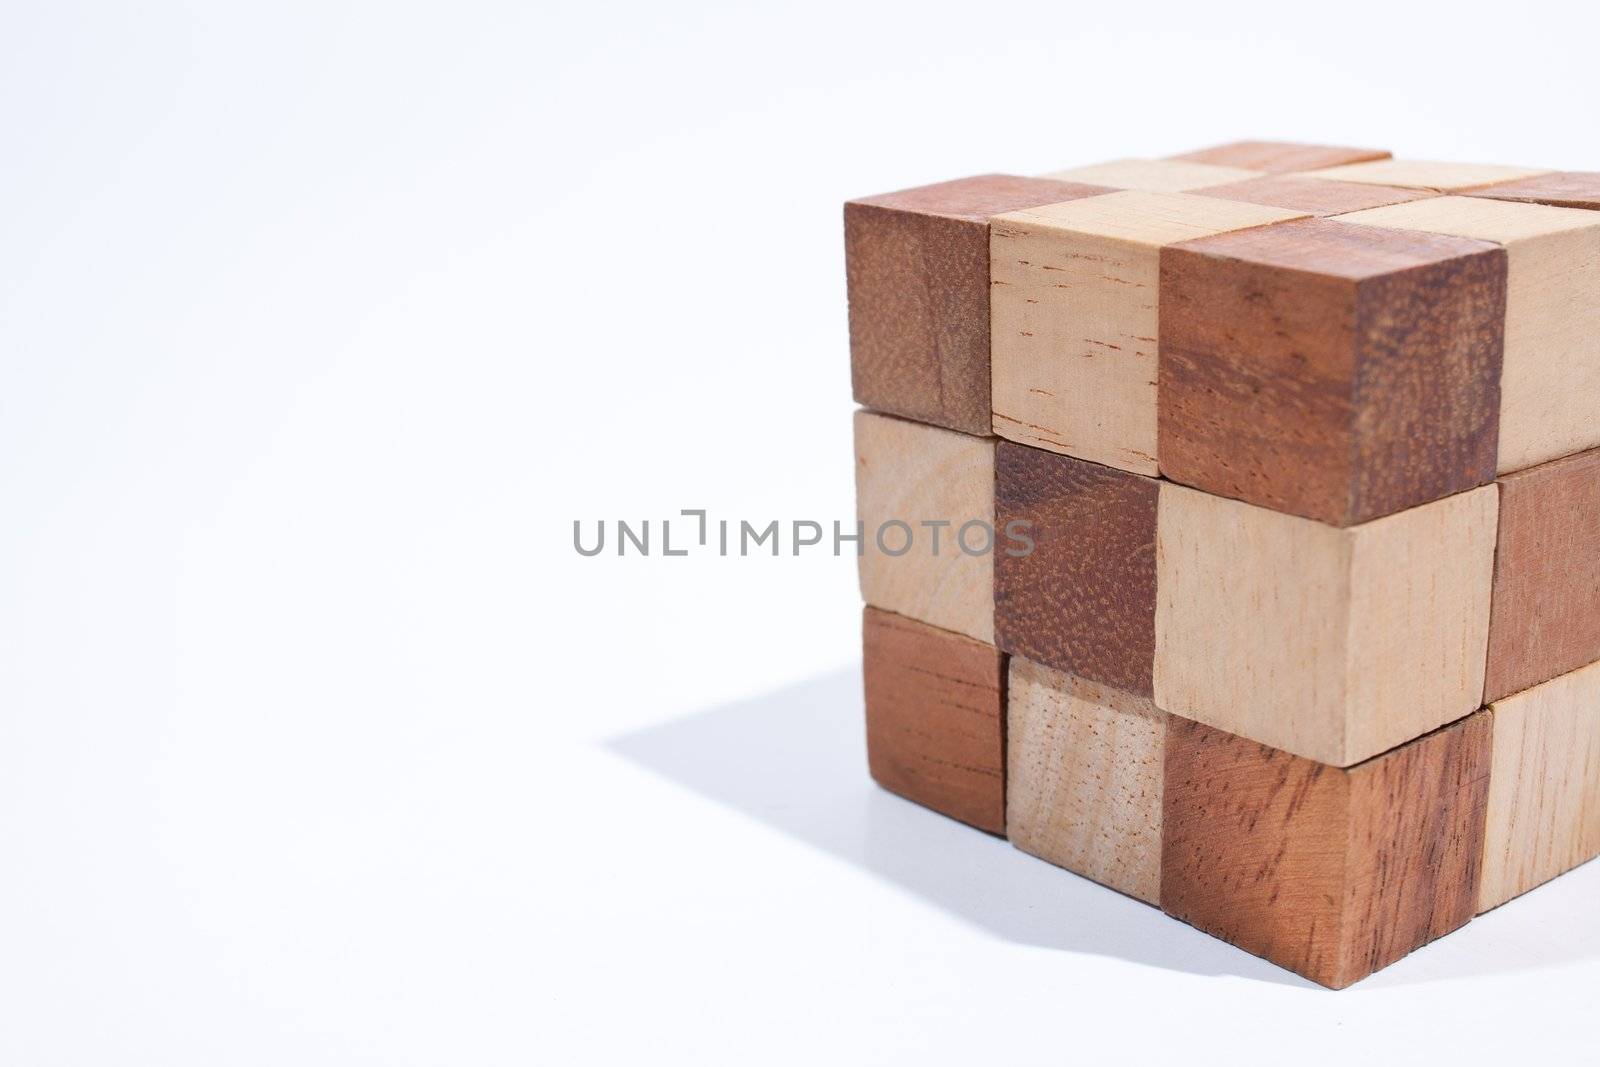 Wooden toy cube. Placed on a white background, then shoot.